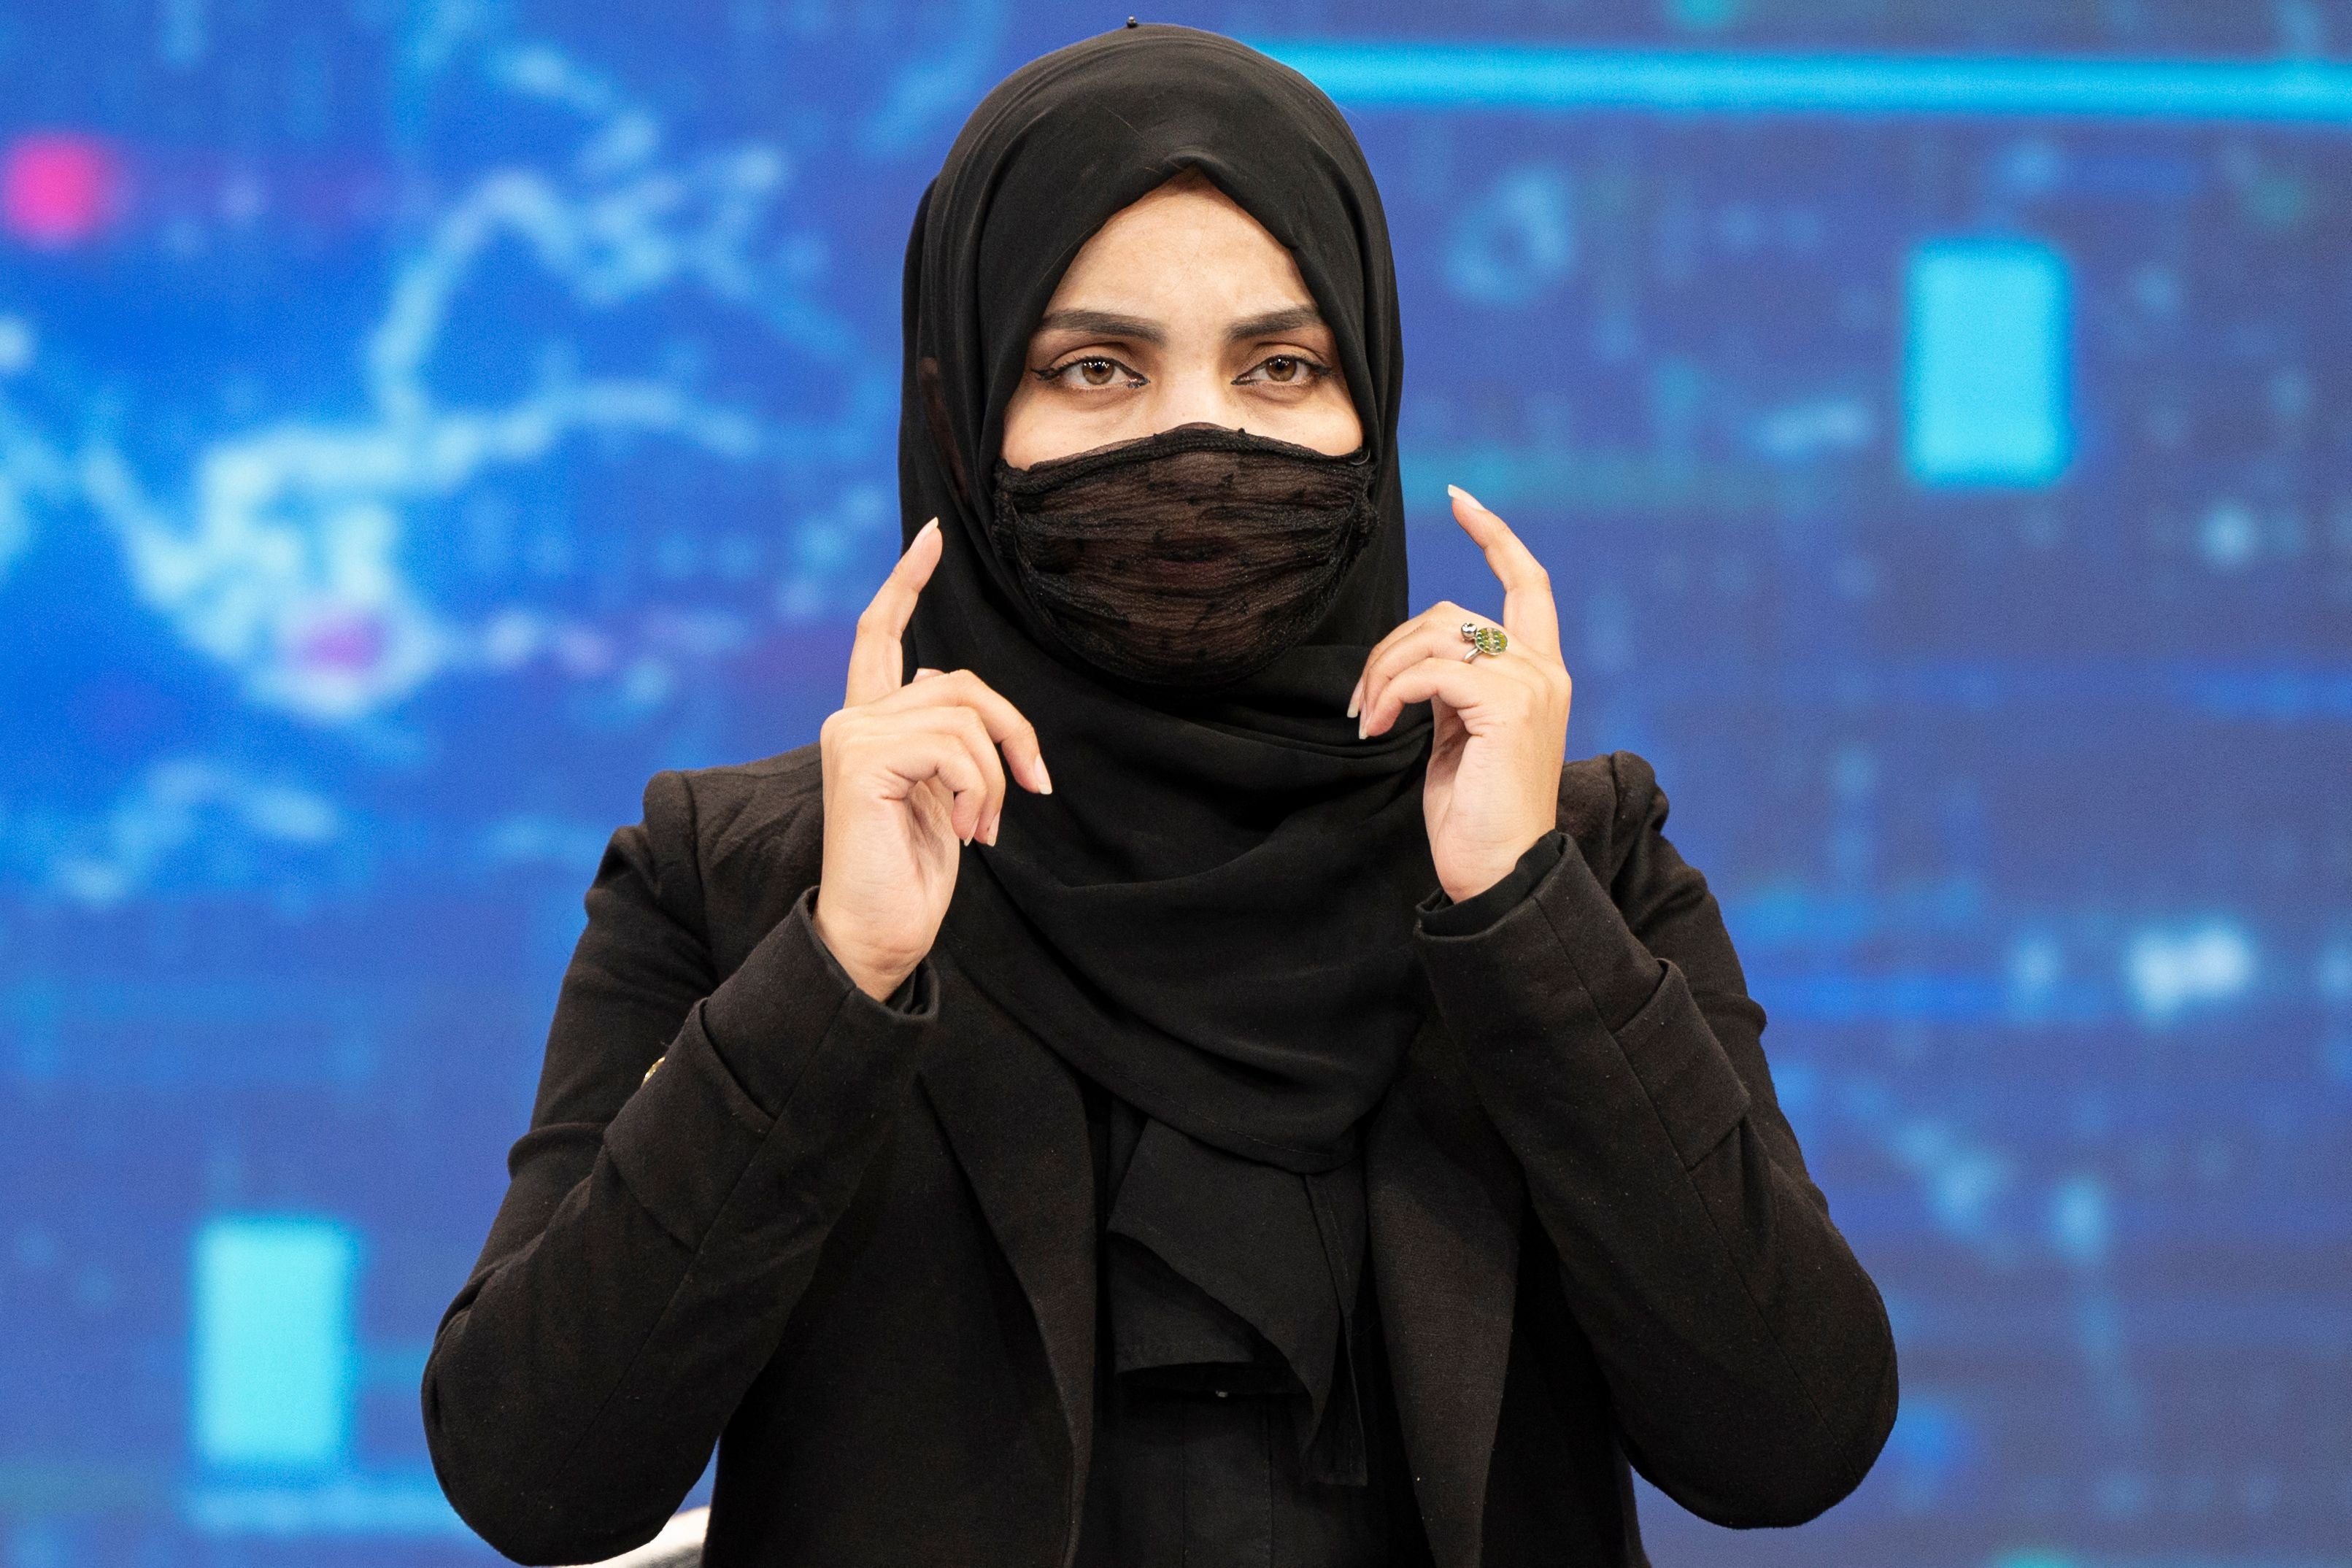 Last week, the Taliban ordered that all female TV anchors must cover their faces while live on air